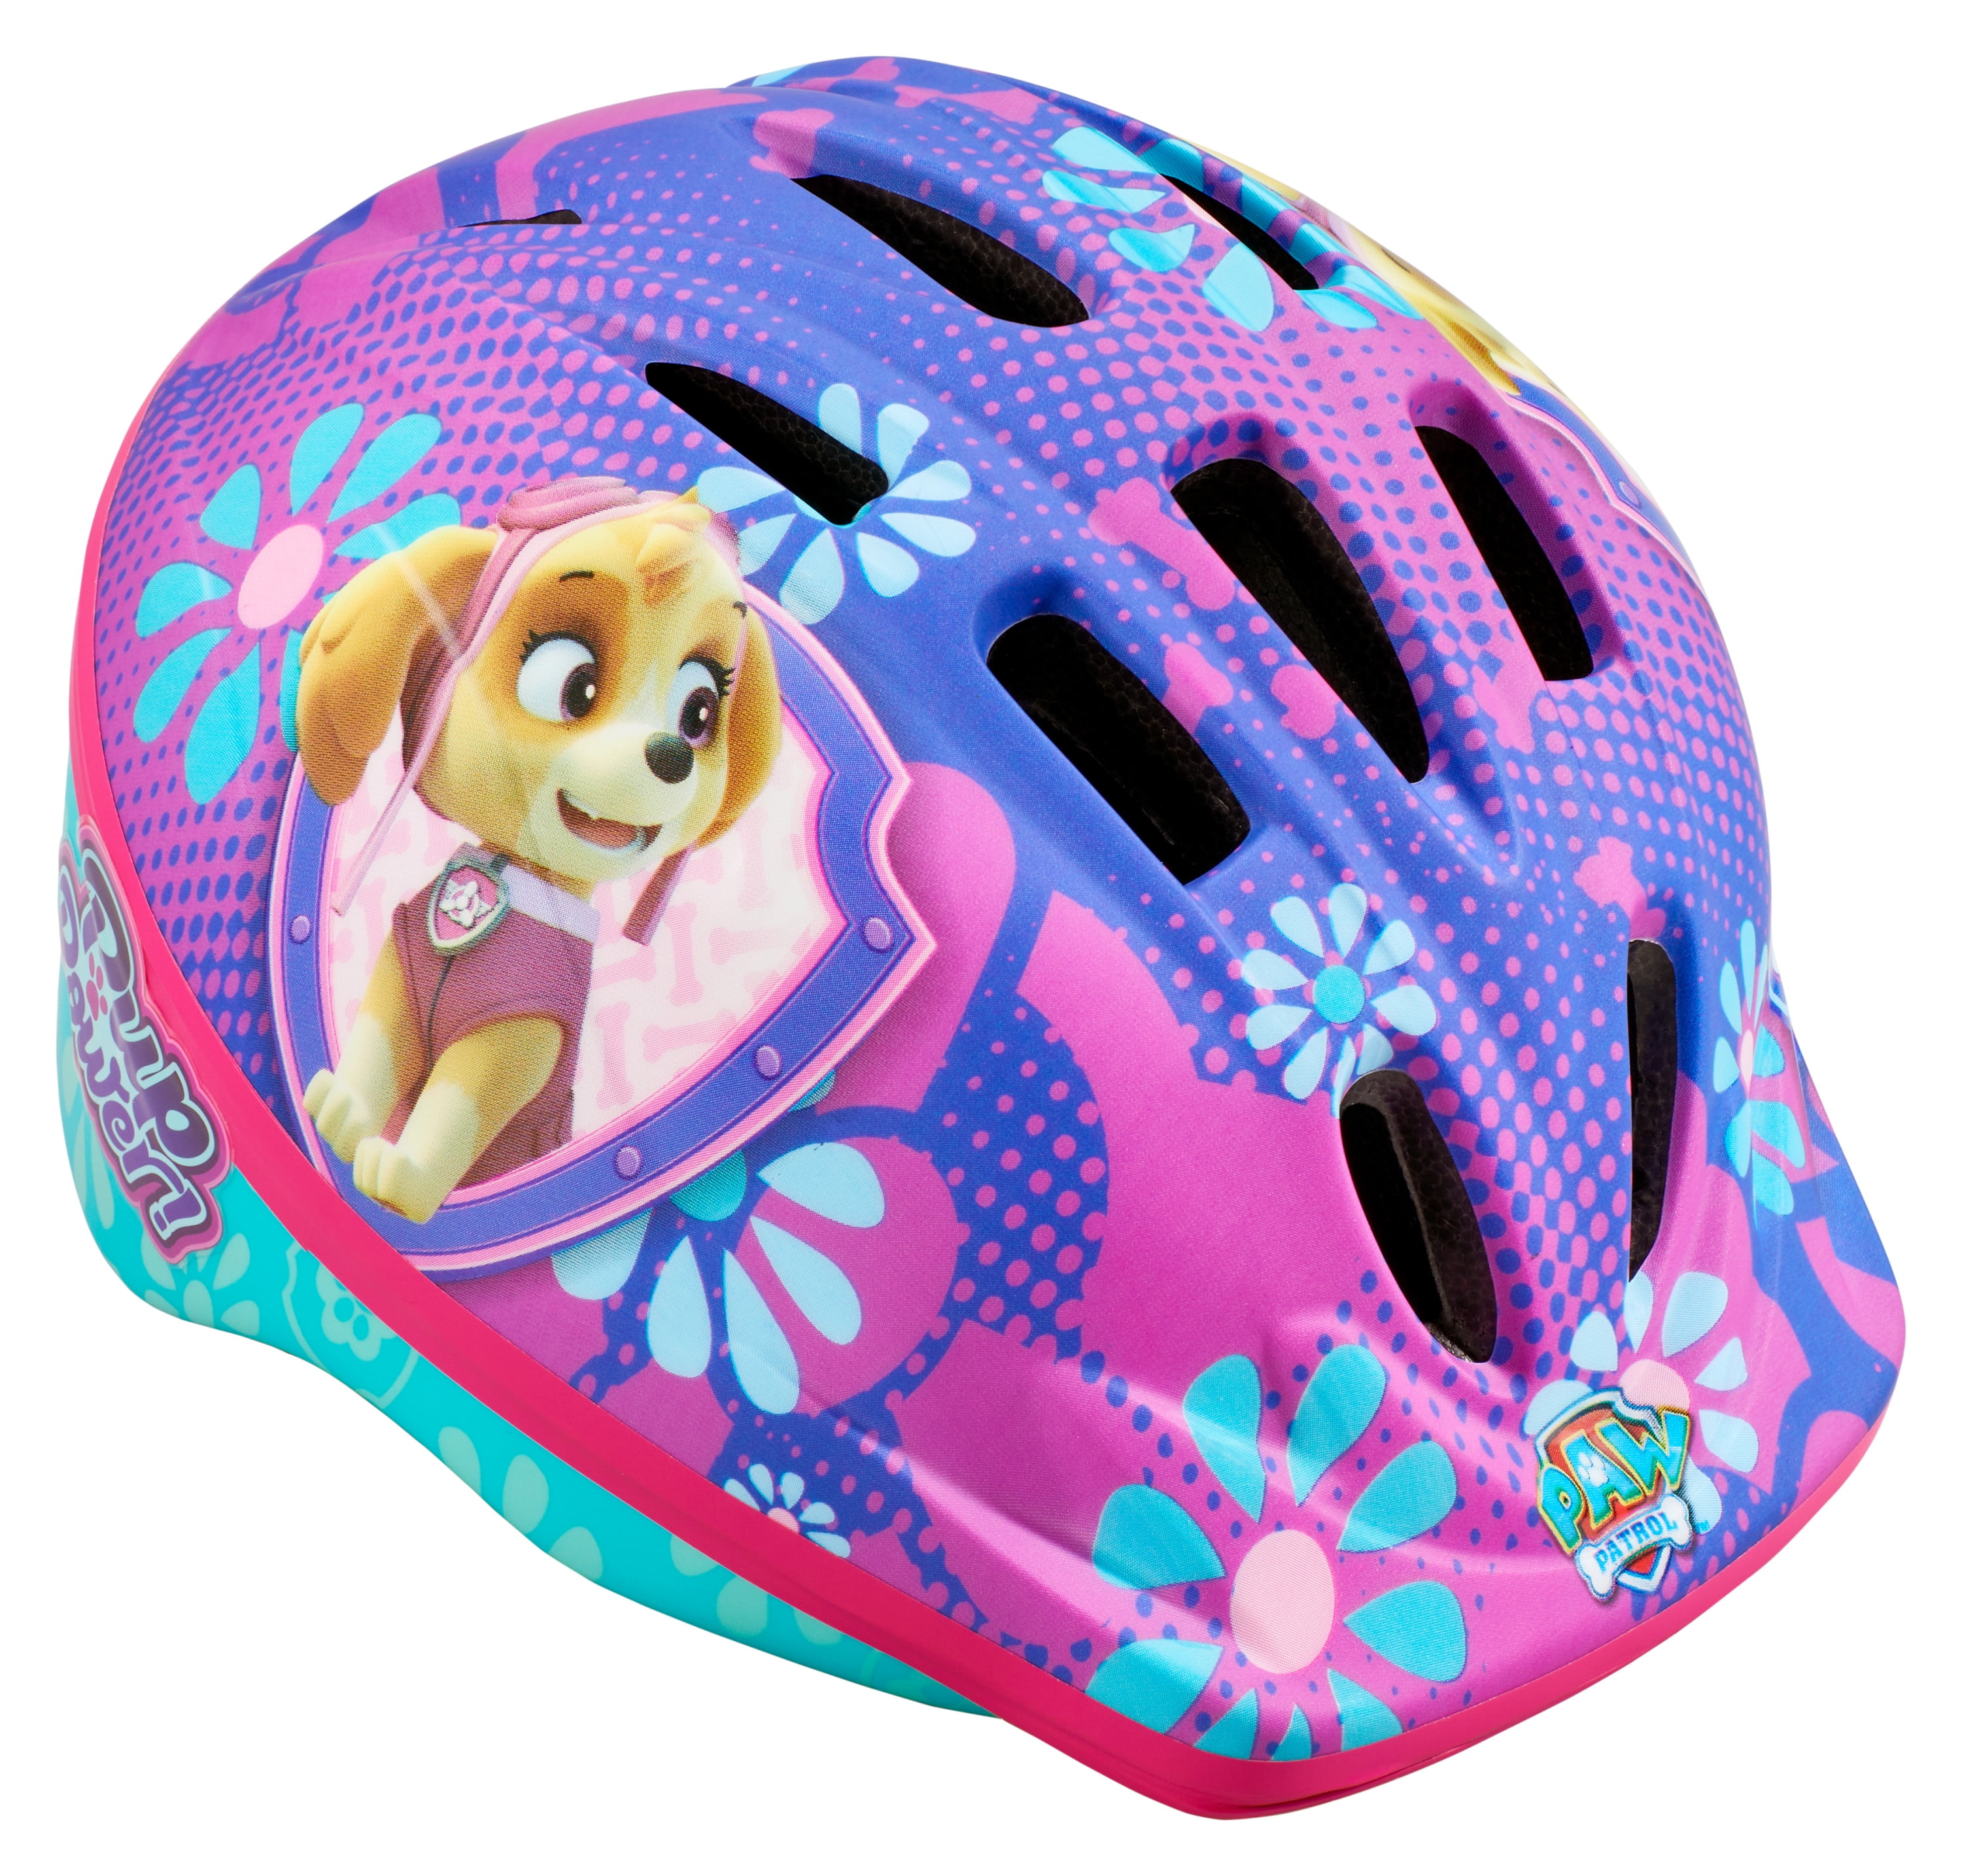 ages 3-5 Details about   Nickelodeon's PAW Patrol Toddler Bicycle Helmet blue yellow NEW 